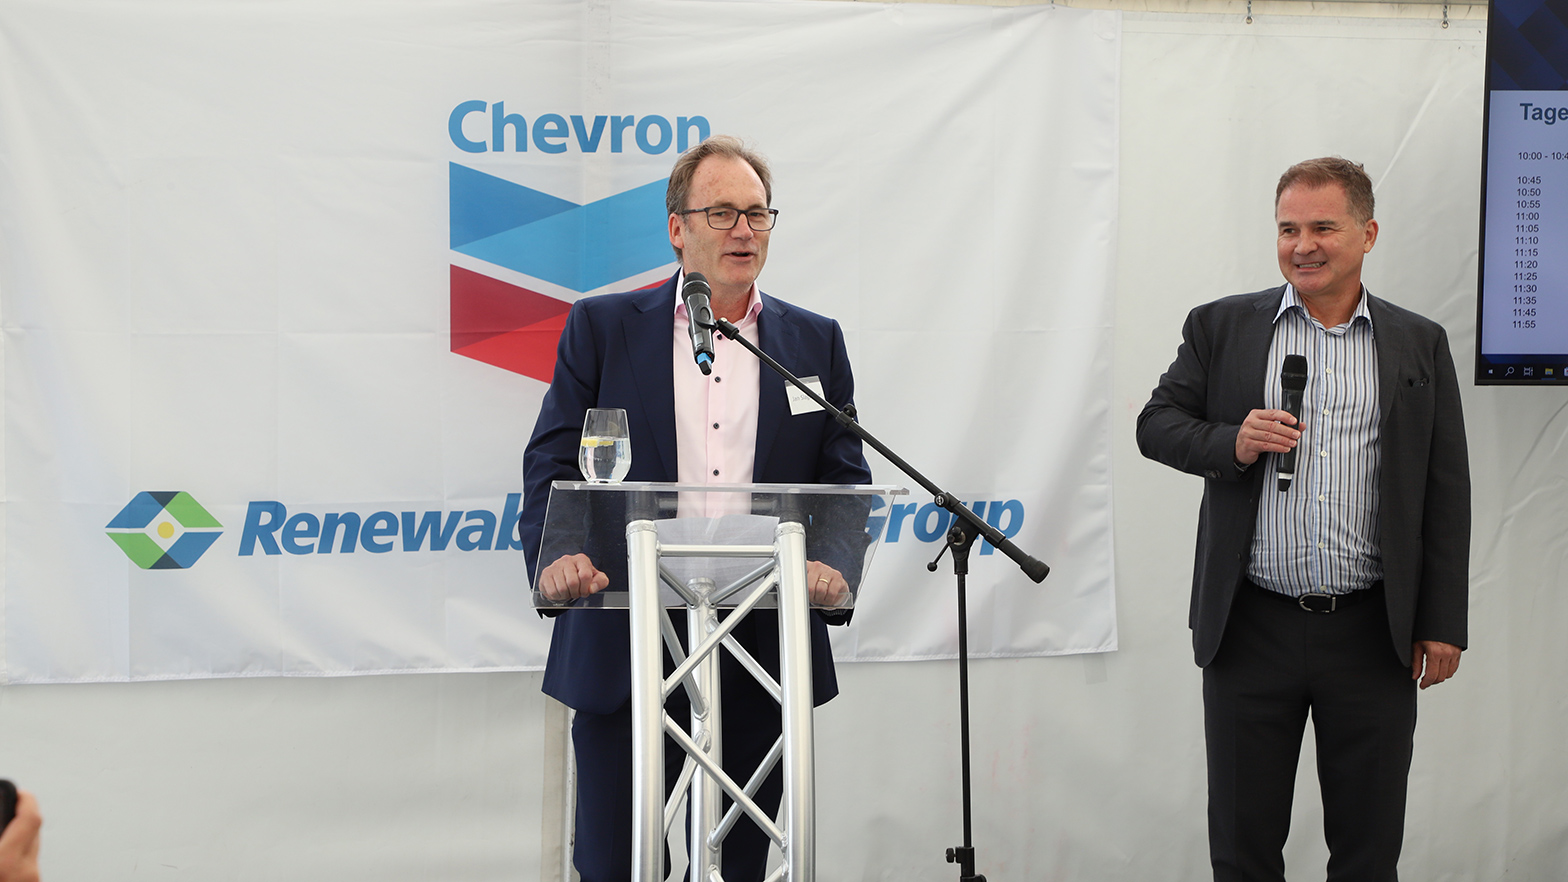 Jan Slaghekke, vice president of international business for Chevron Renewable Energy Group, and Michael Fiedler-Panajotopoulos at the groundbreaking event.